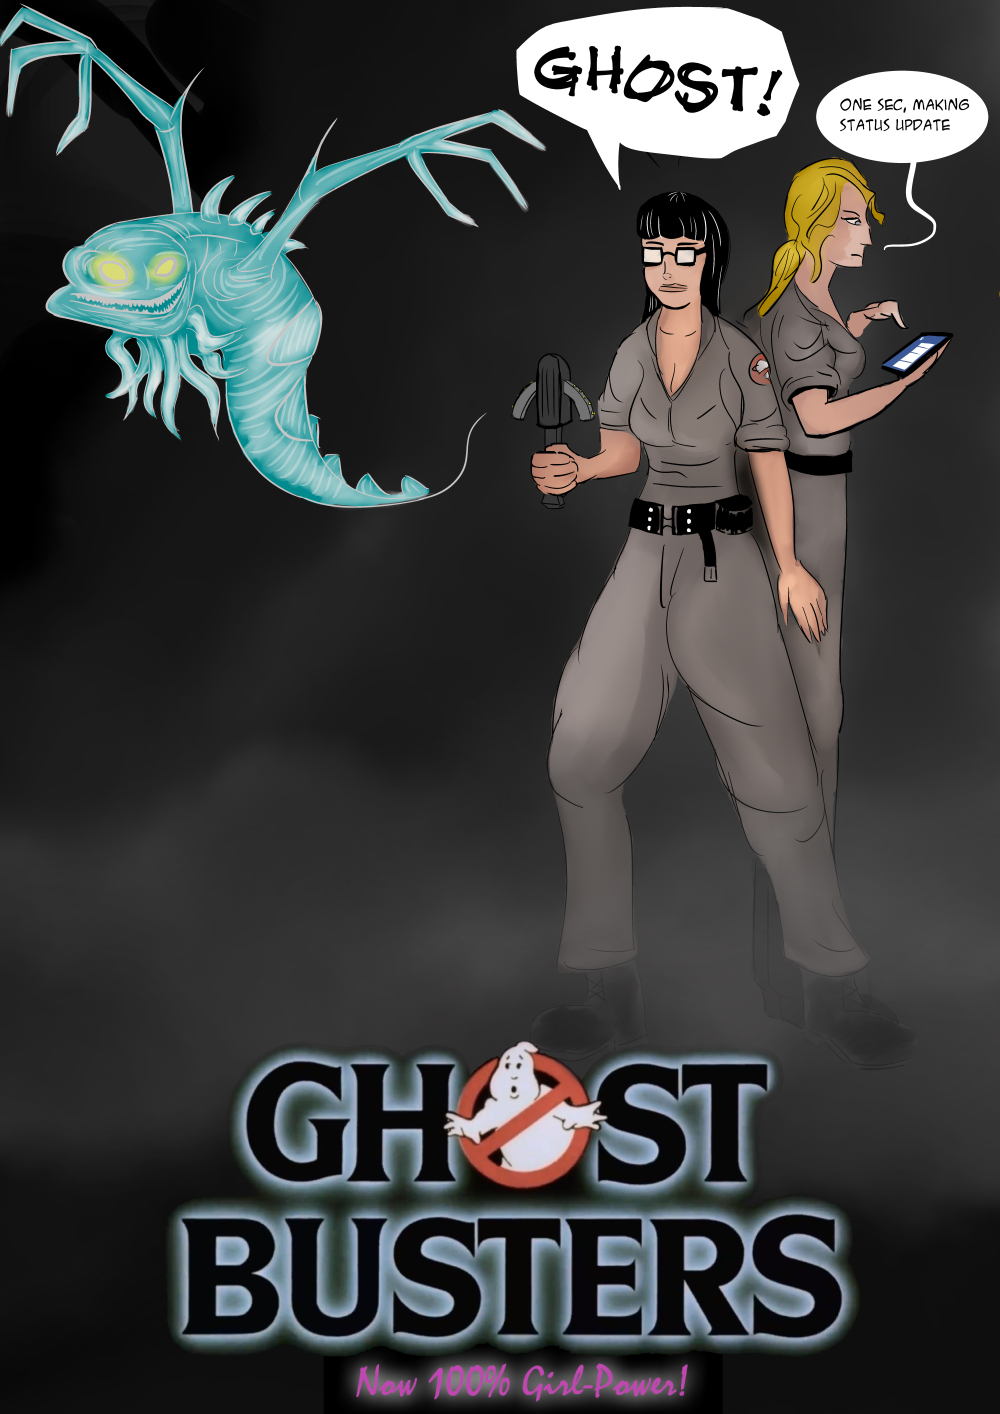 All Female Ghostbusters!